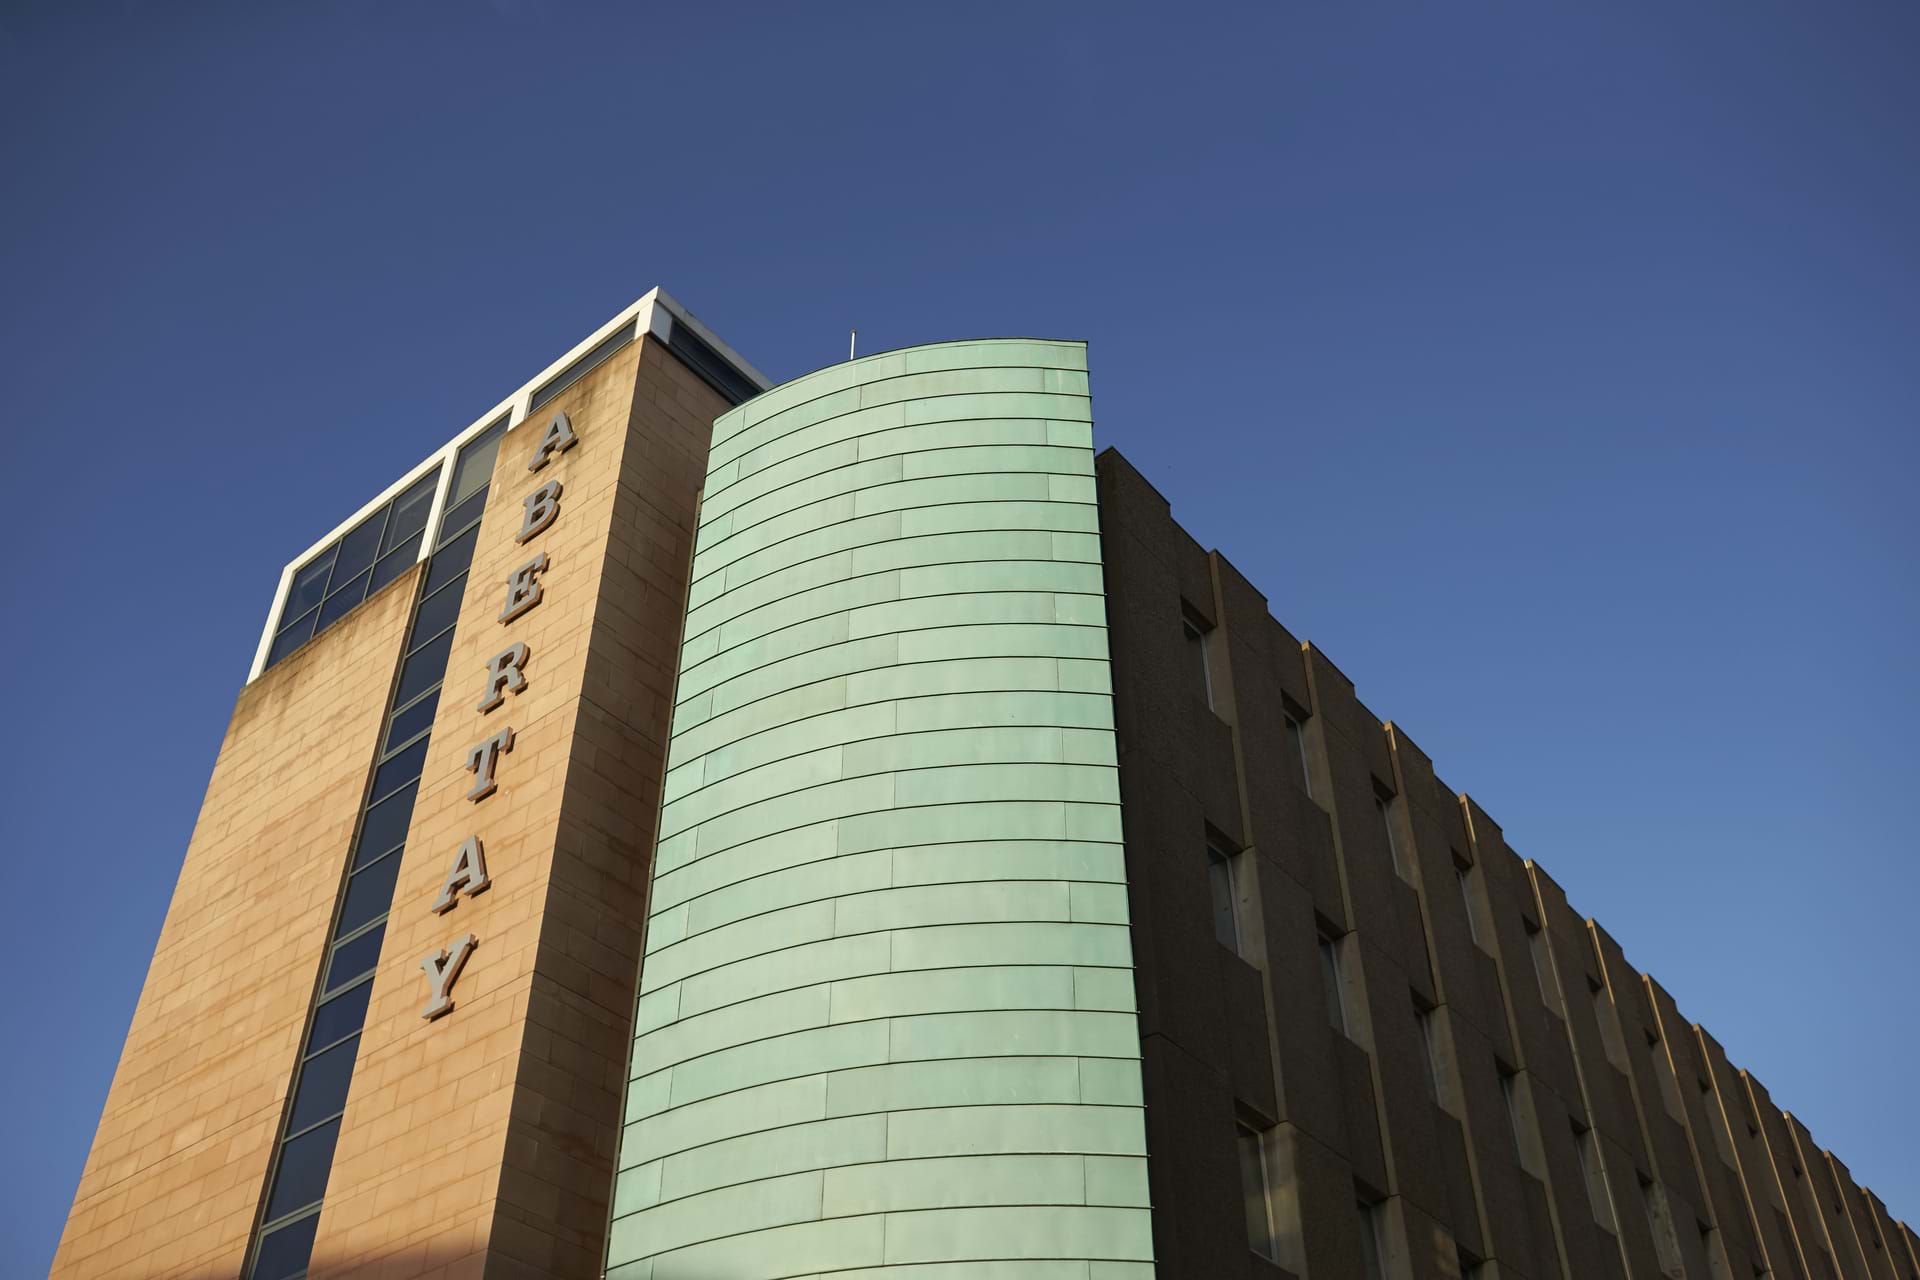 The building shows the Abertay building with a blue sky behind.